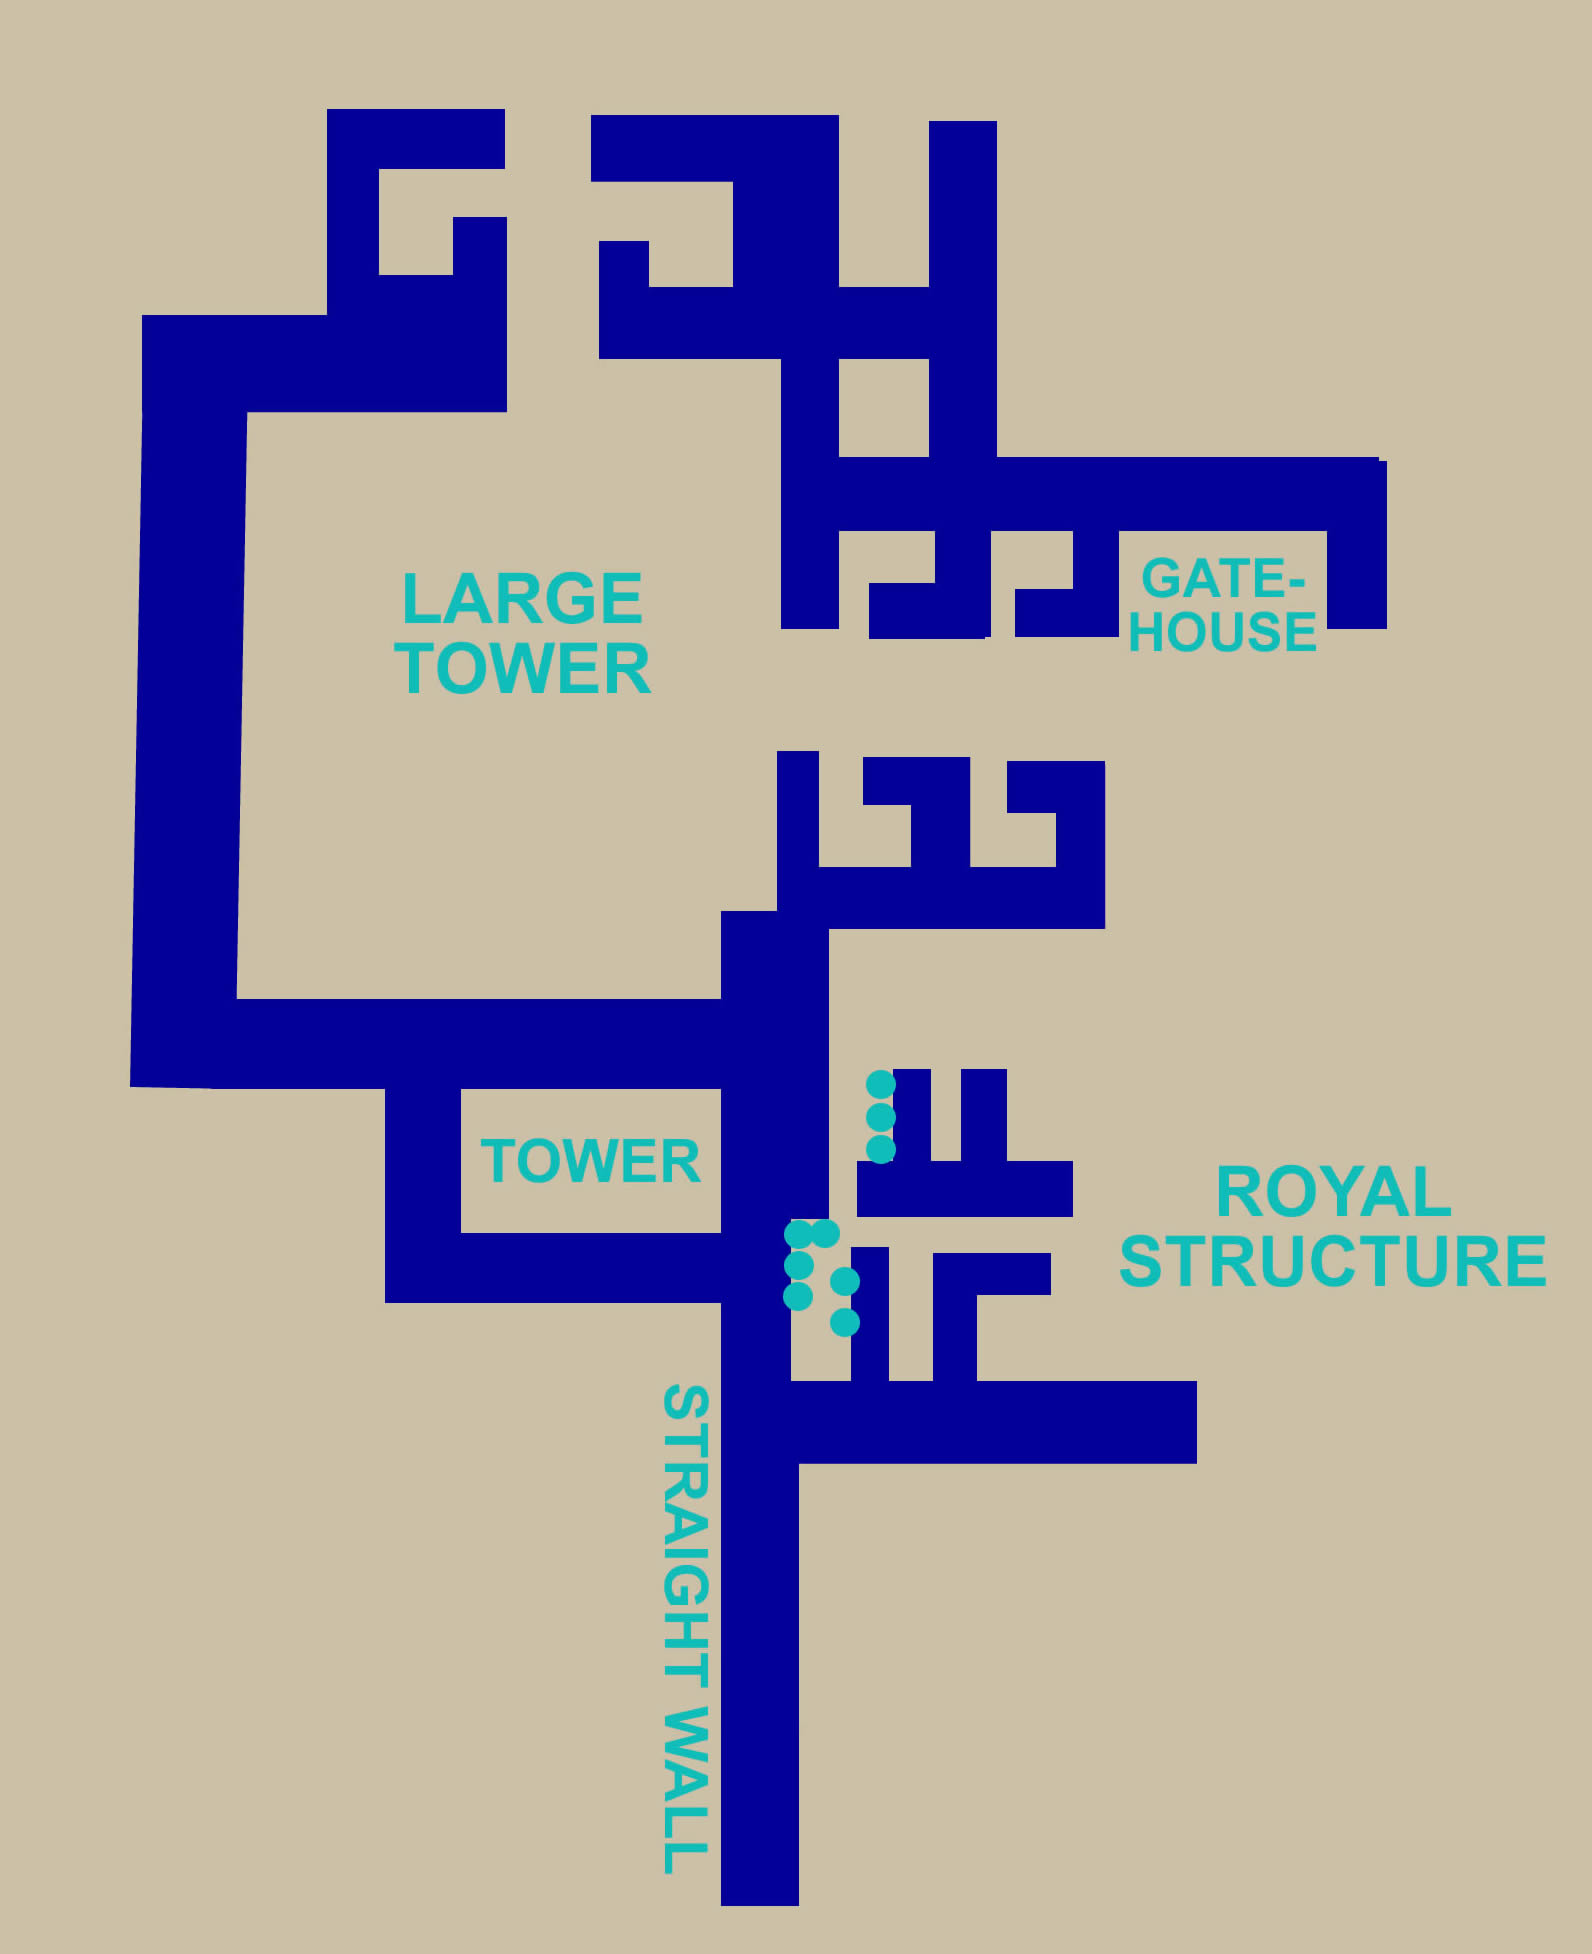 Solomon's Gate, Ophel, Gate House, Solomon's Wall south of Temple Mount, Diagram of Gate and Royal Structure on Ophel, Tower, extra tower